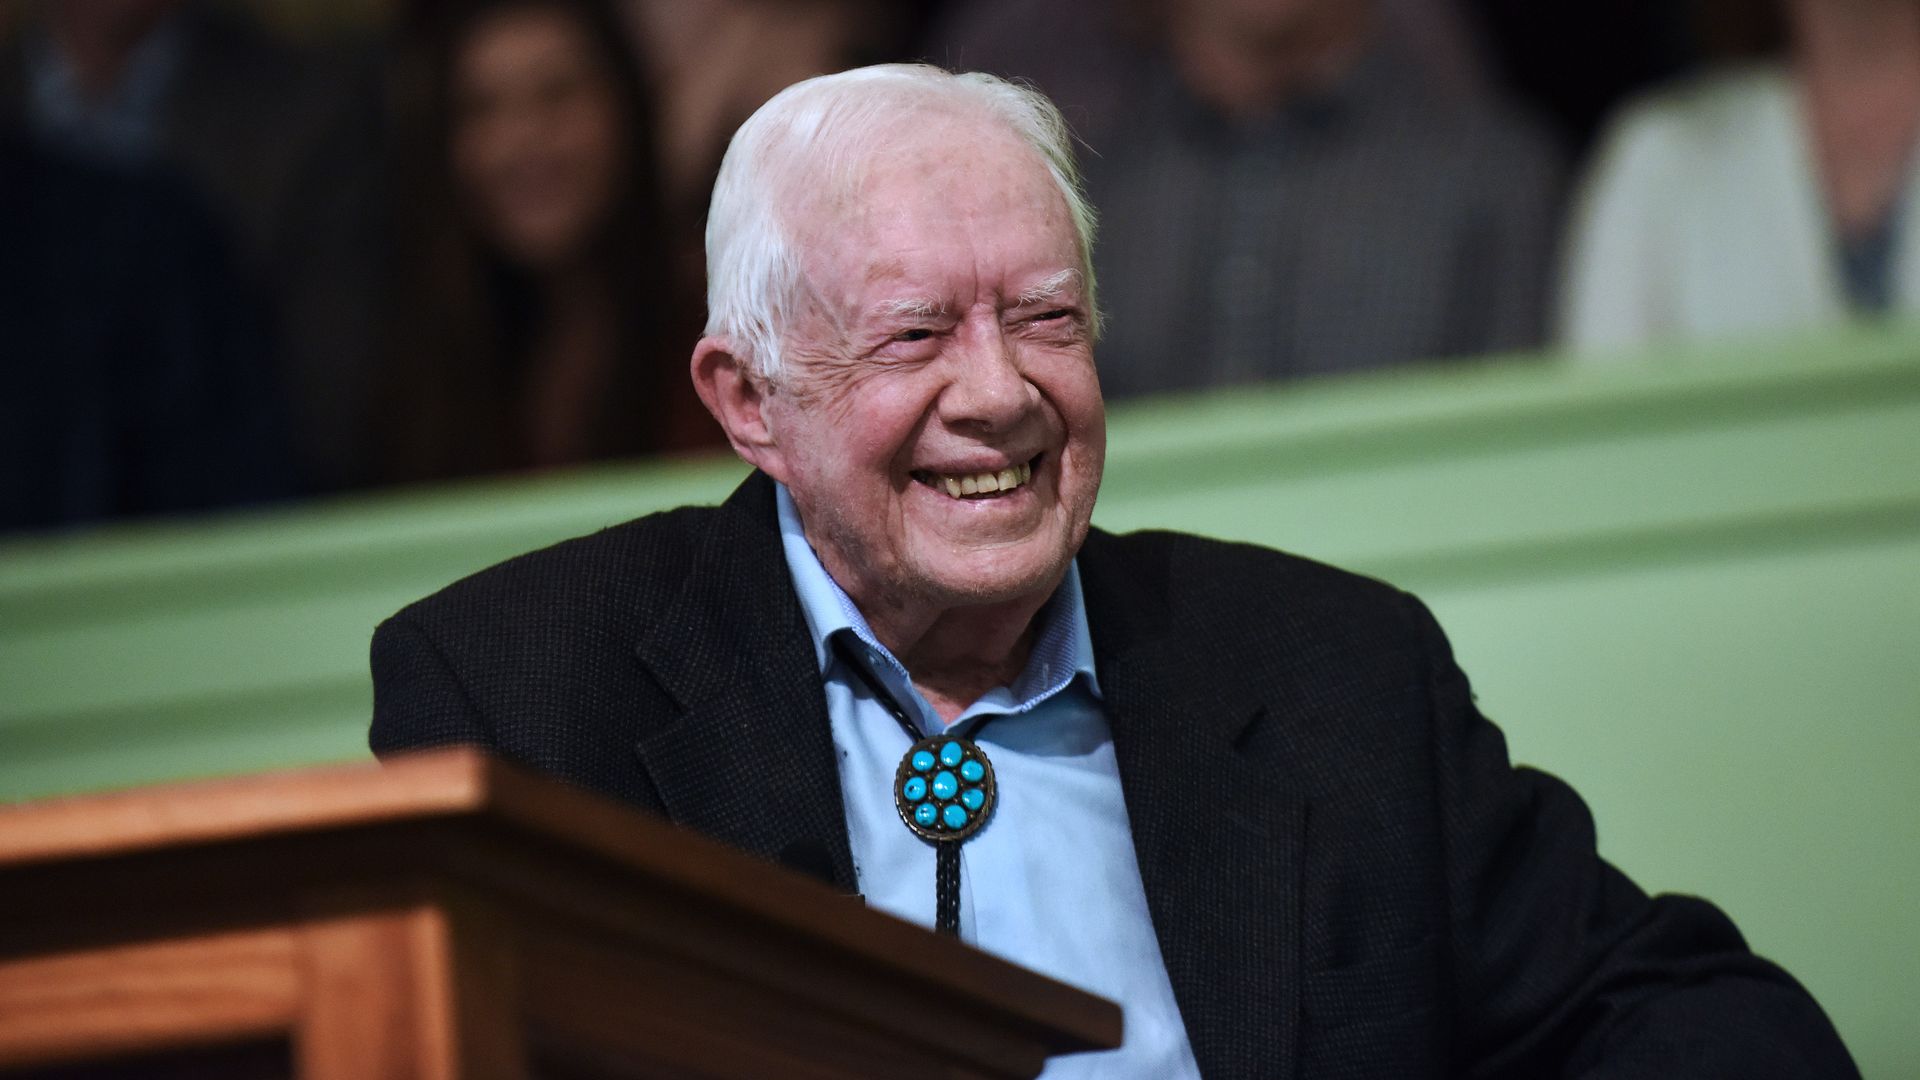 Jimmy Carter speaks to the congregation at Maranatha Baptist Church before teaching Sunday school in his hometown of Plains, Georgia